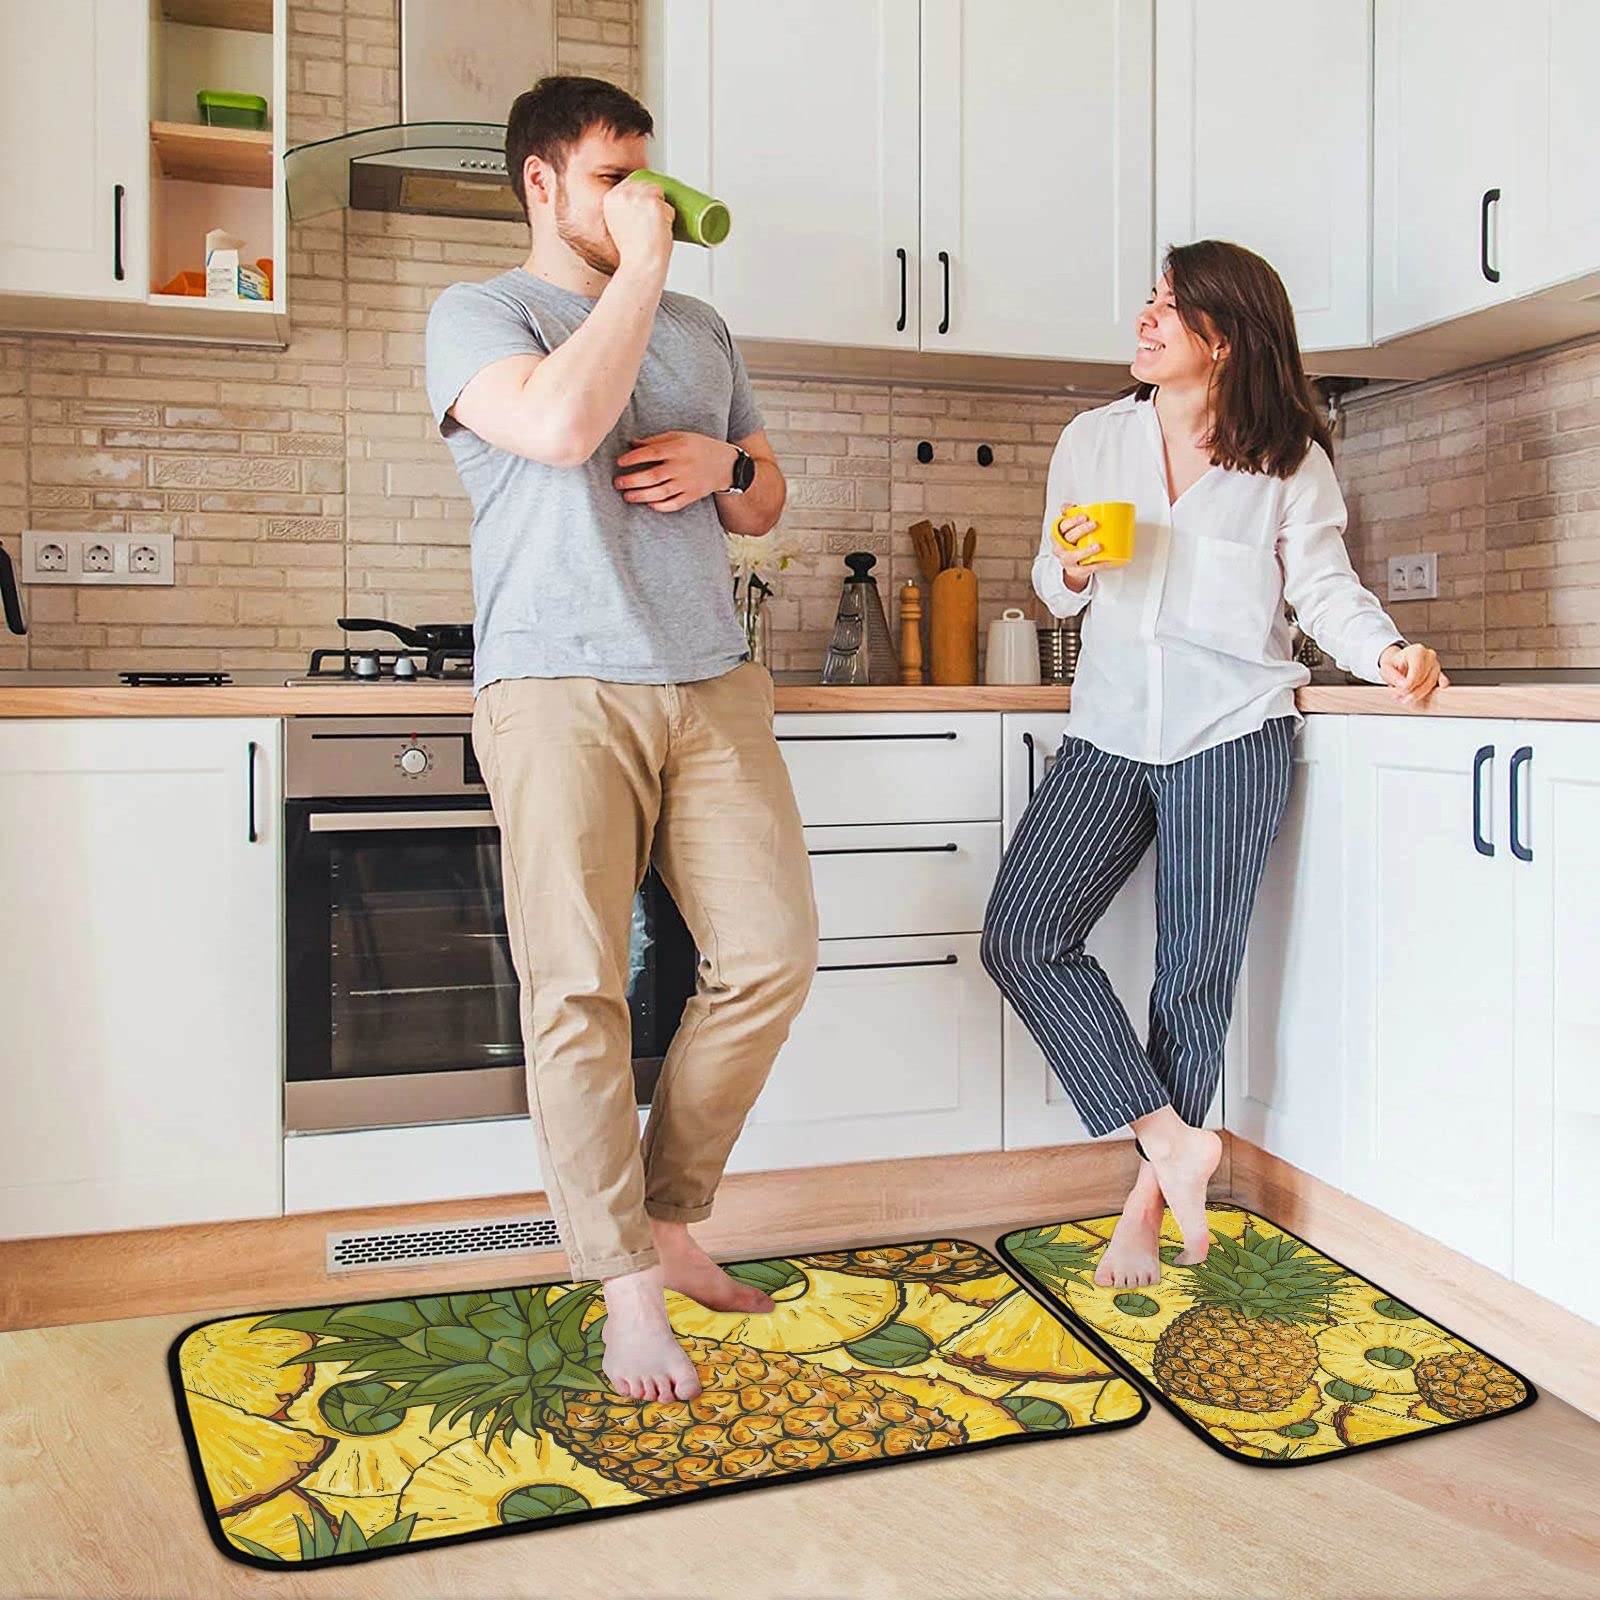 BOENLE Kitchen Rugs and Mats Non Skid Washable Kitchen Rug Set 2 Piece Tropical Pineapple Exotic Fruits Carpet Ergonomic Comfort Standing Mat for Kitchen,Bathroom, Laundry